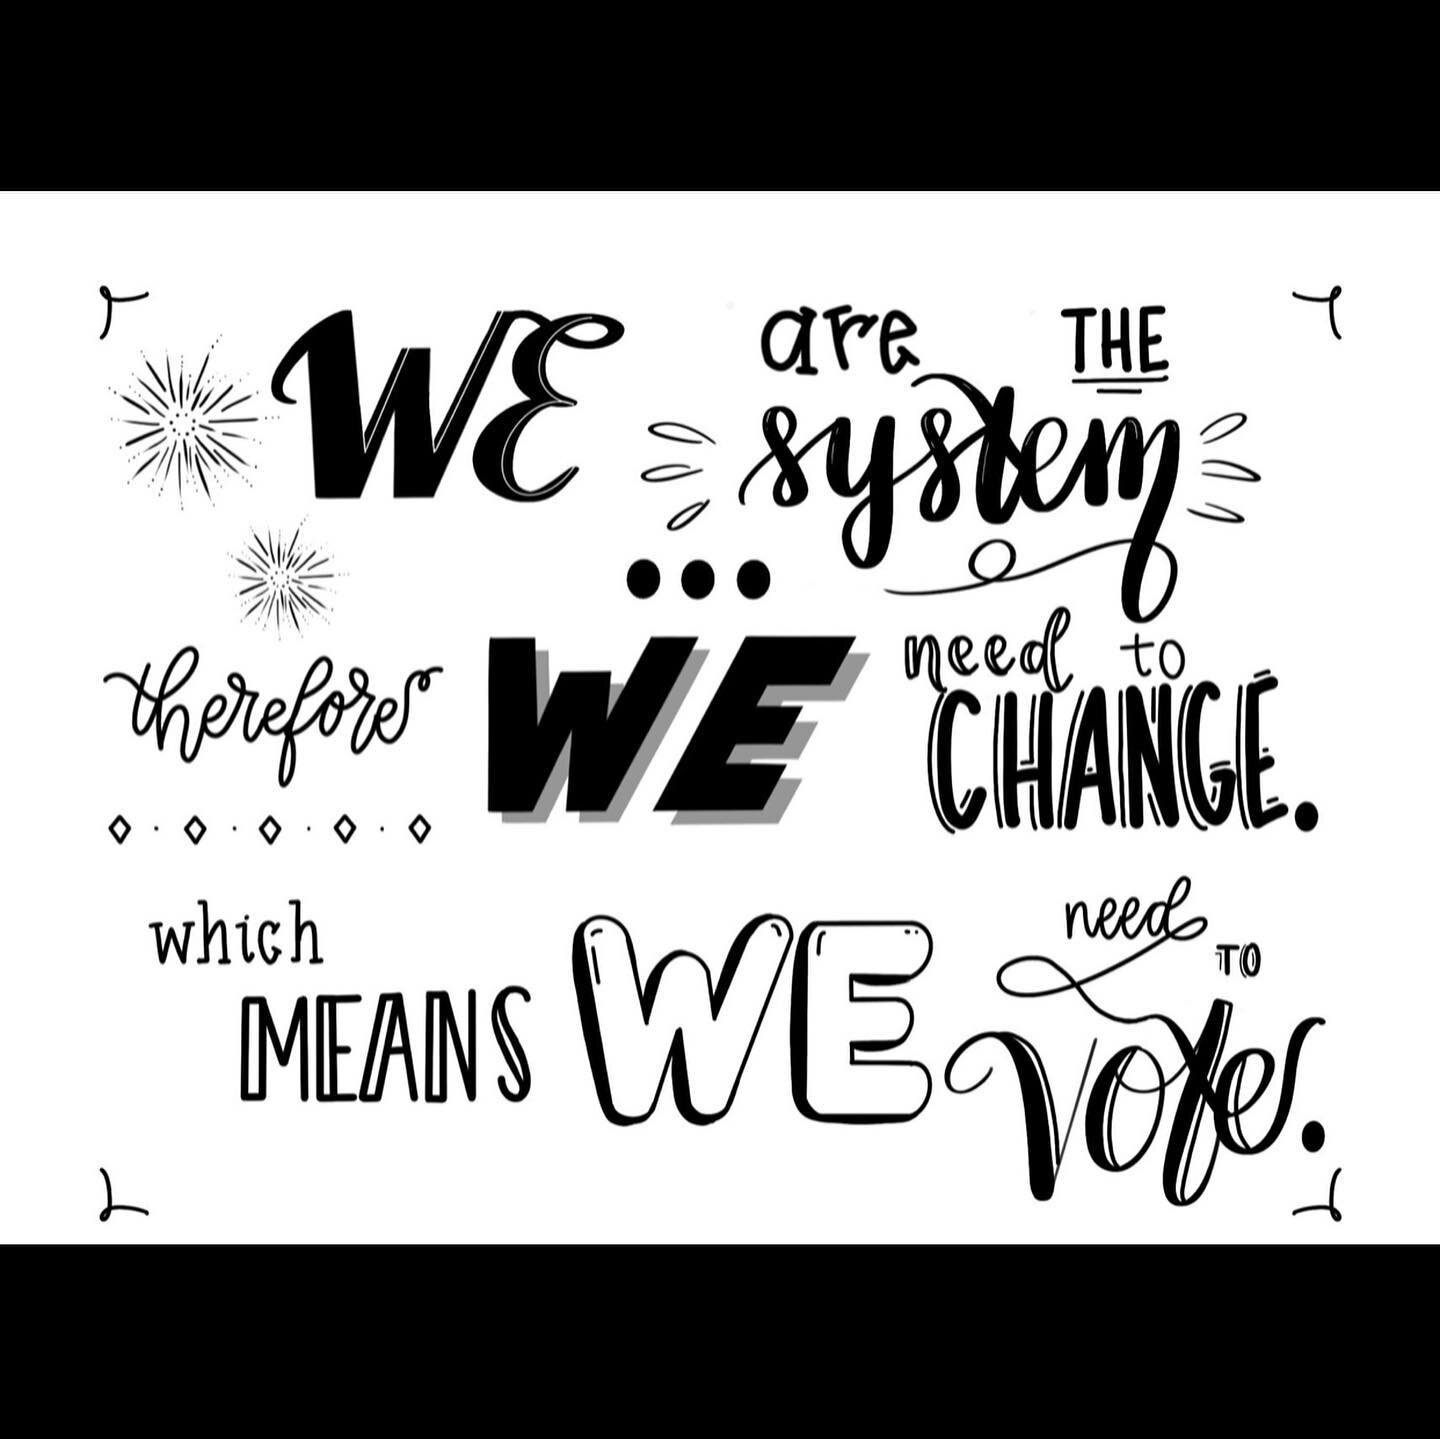 &ldquo;WE are the system, therefore WE need to change, which means WE need to vote.&rdquo; Buy a pack of 5 or send a single card out to a friend. 💌📫📬📭Thank you @lizziemickiewicz for blending your artwork with @eniesburton&rsquo;s words to come up